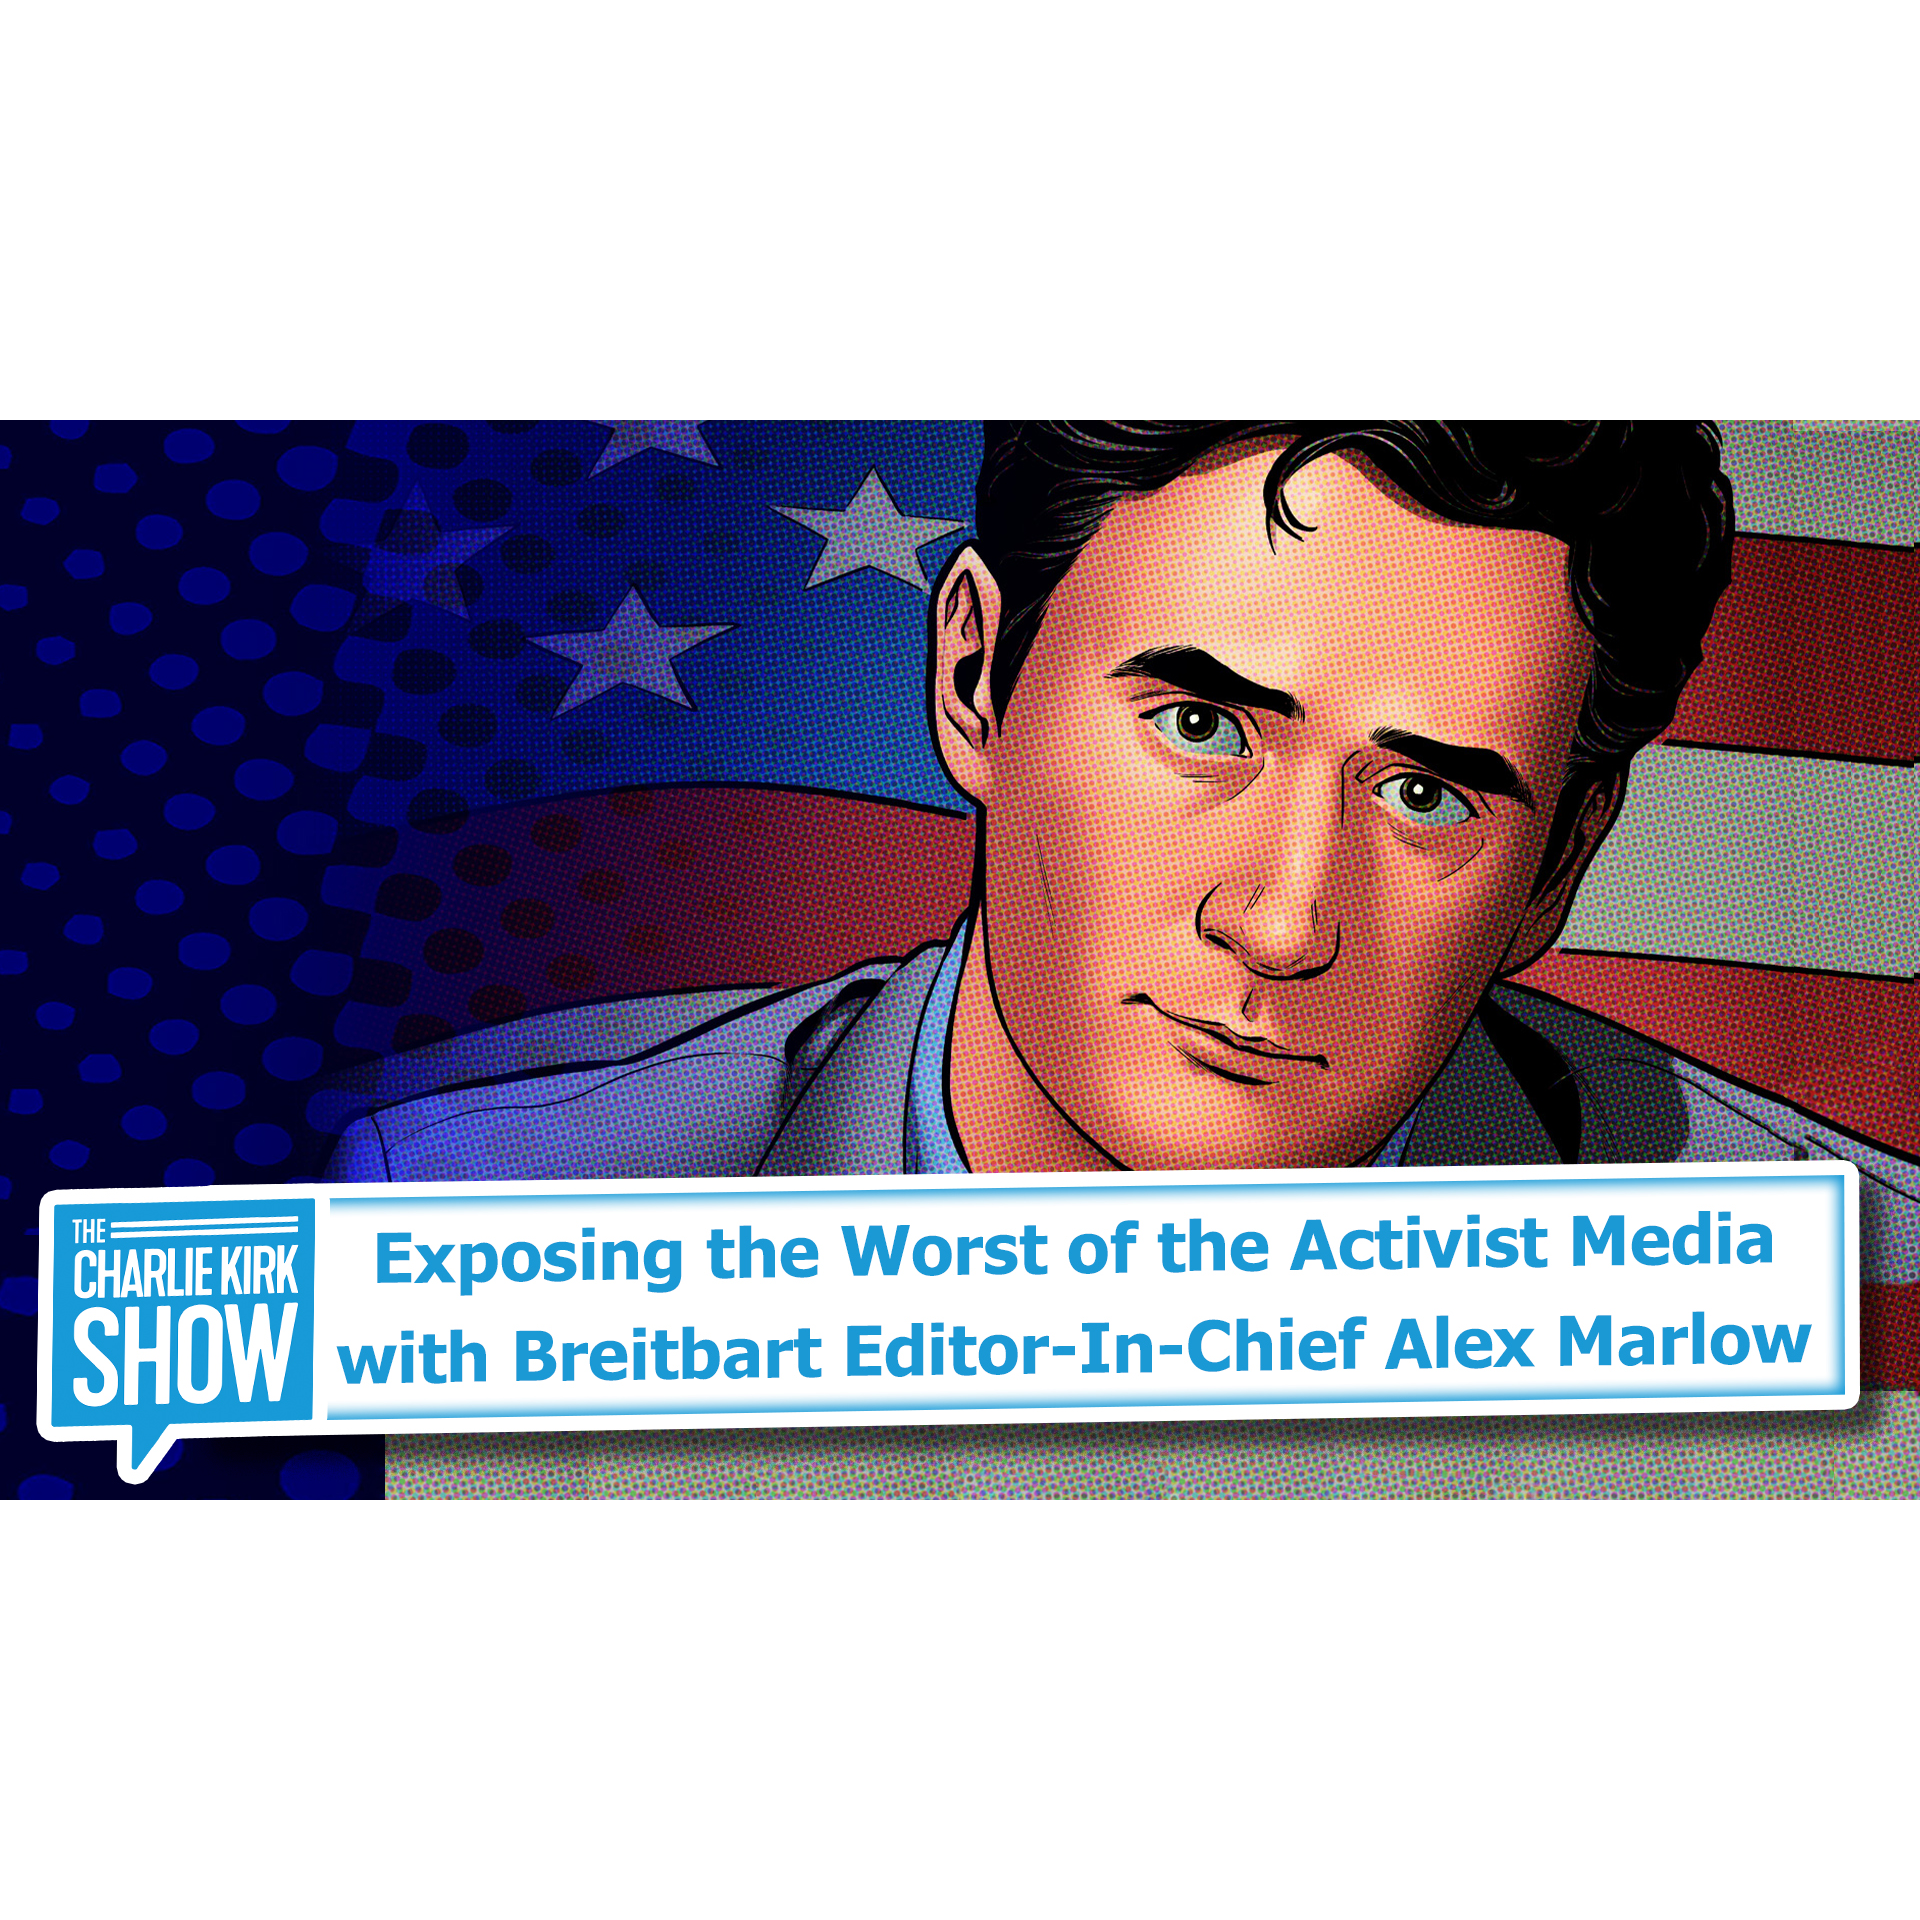 Breaking the News—Exposing the Worst of the Activist Media with Breitbart Editor-In-Chief Alex Marlow